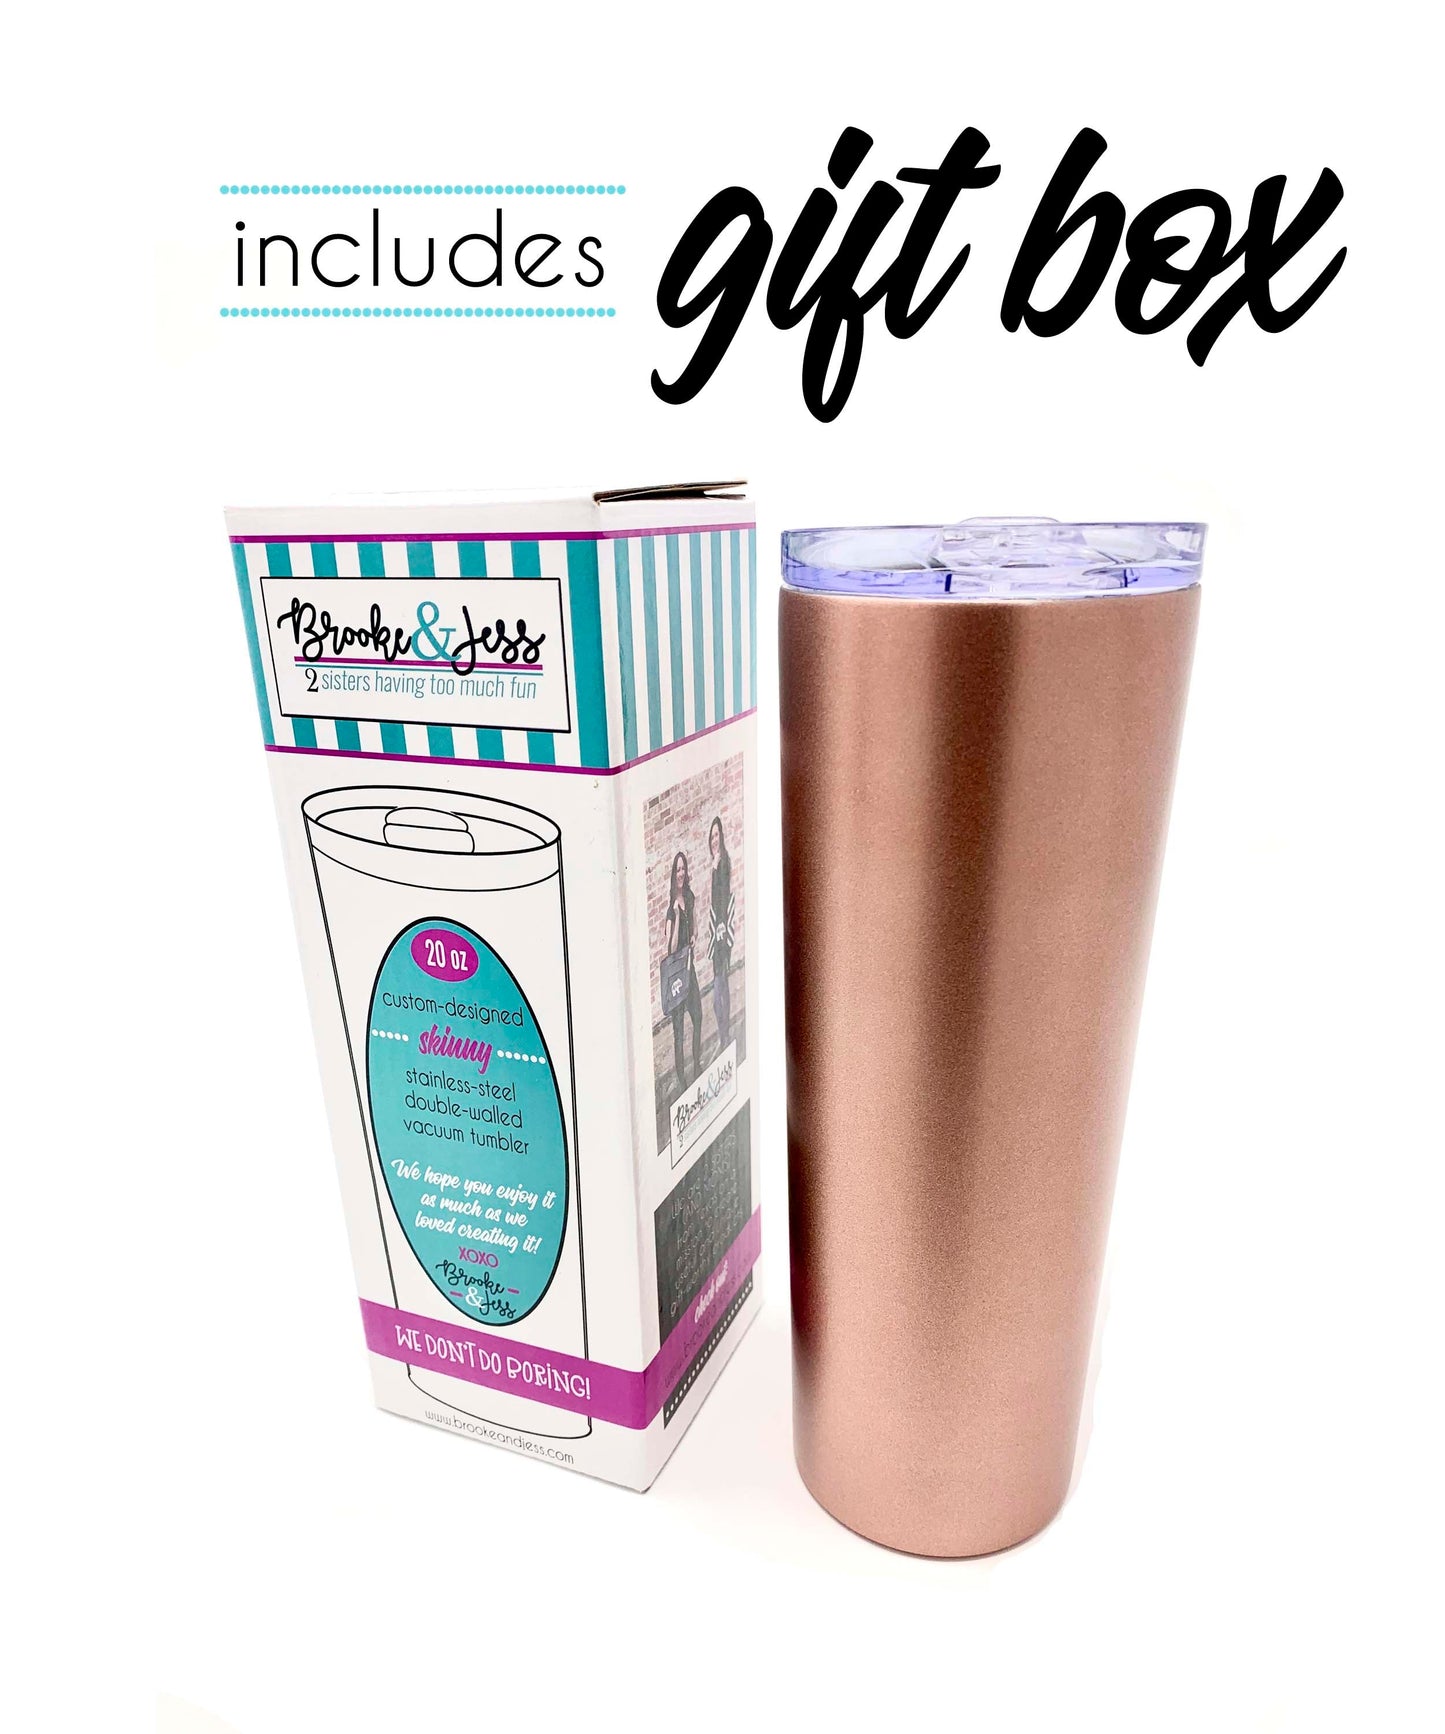 Coffee Scrubs And Rubber Gloves 20 oz Rose Gold Skinny Tumbler - Outlet Deal Texas